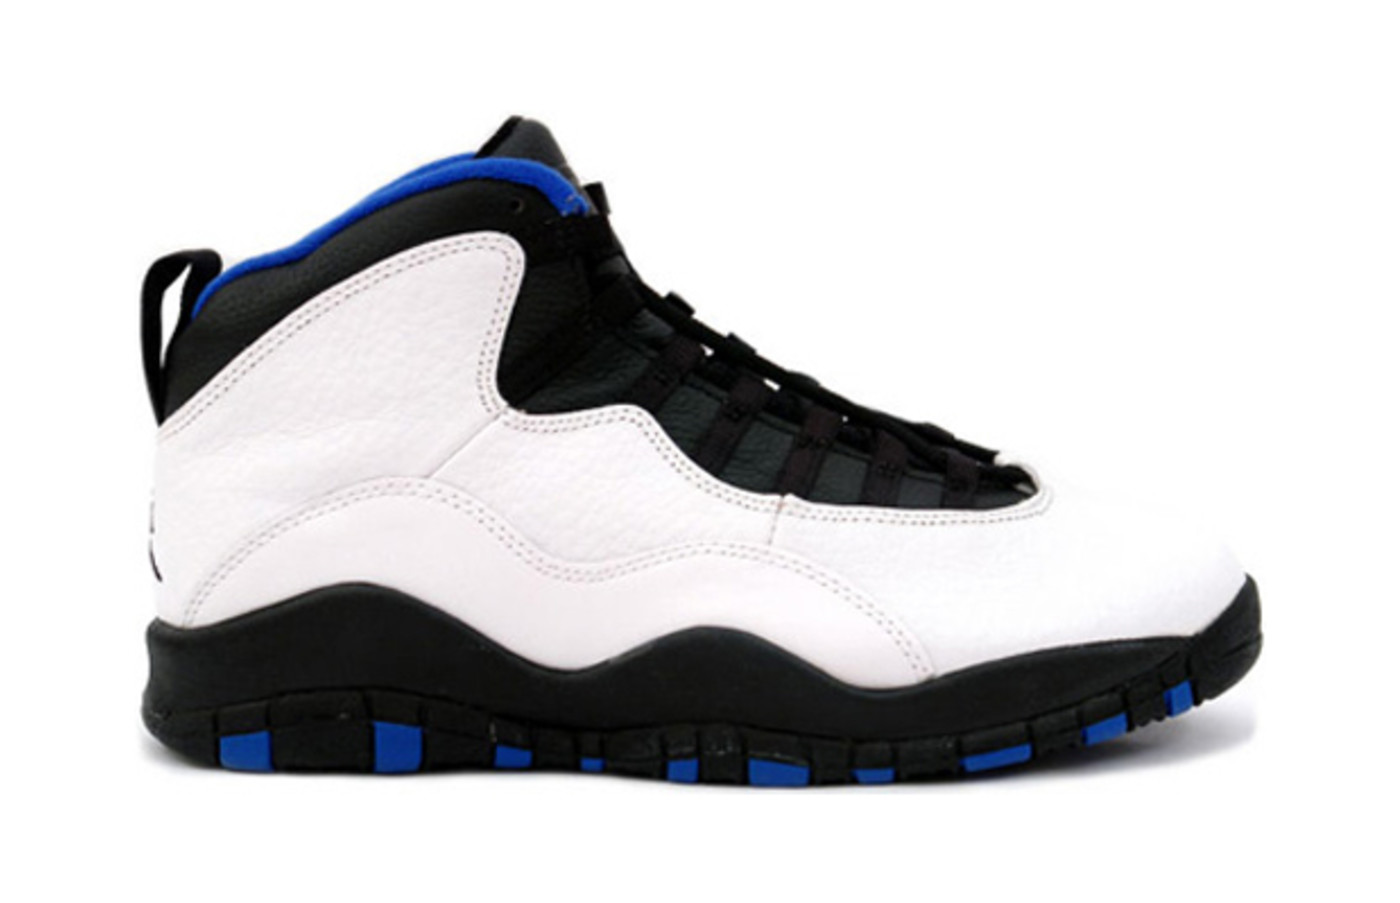 the best jordans of all time